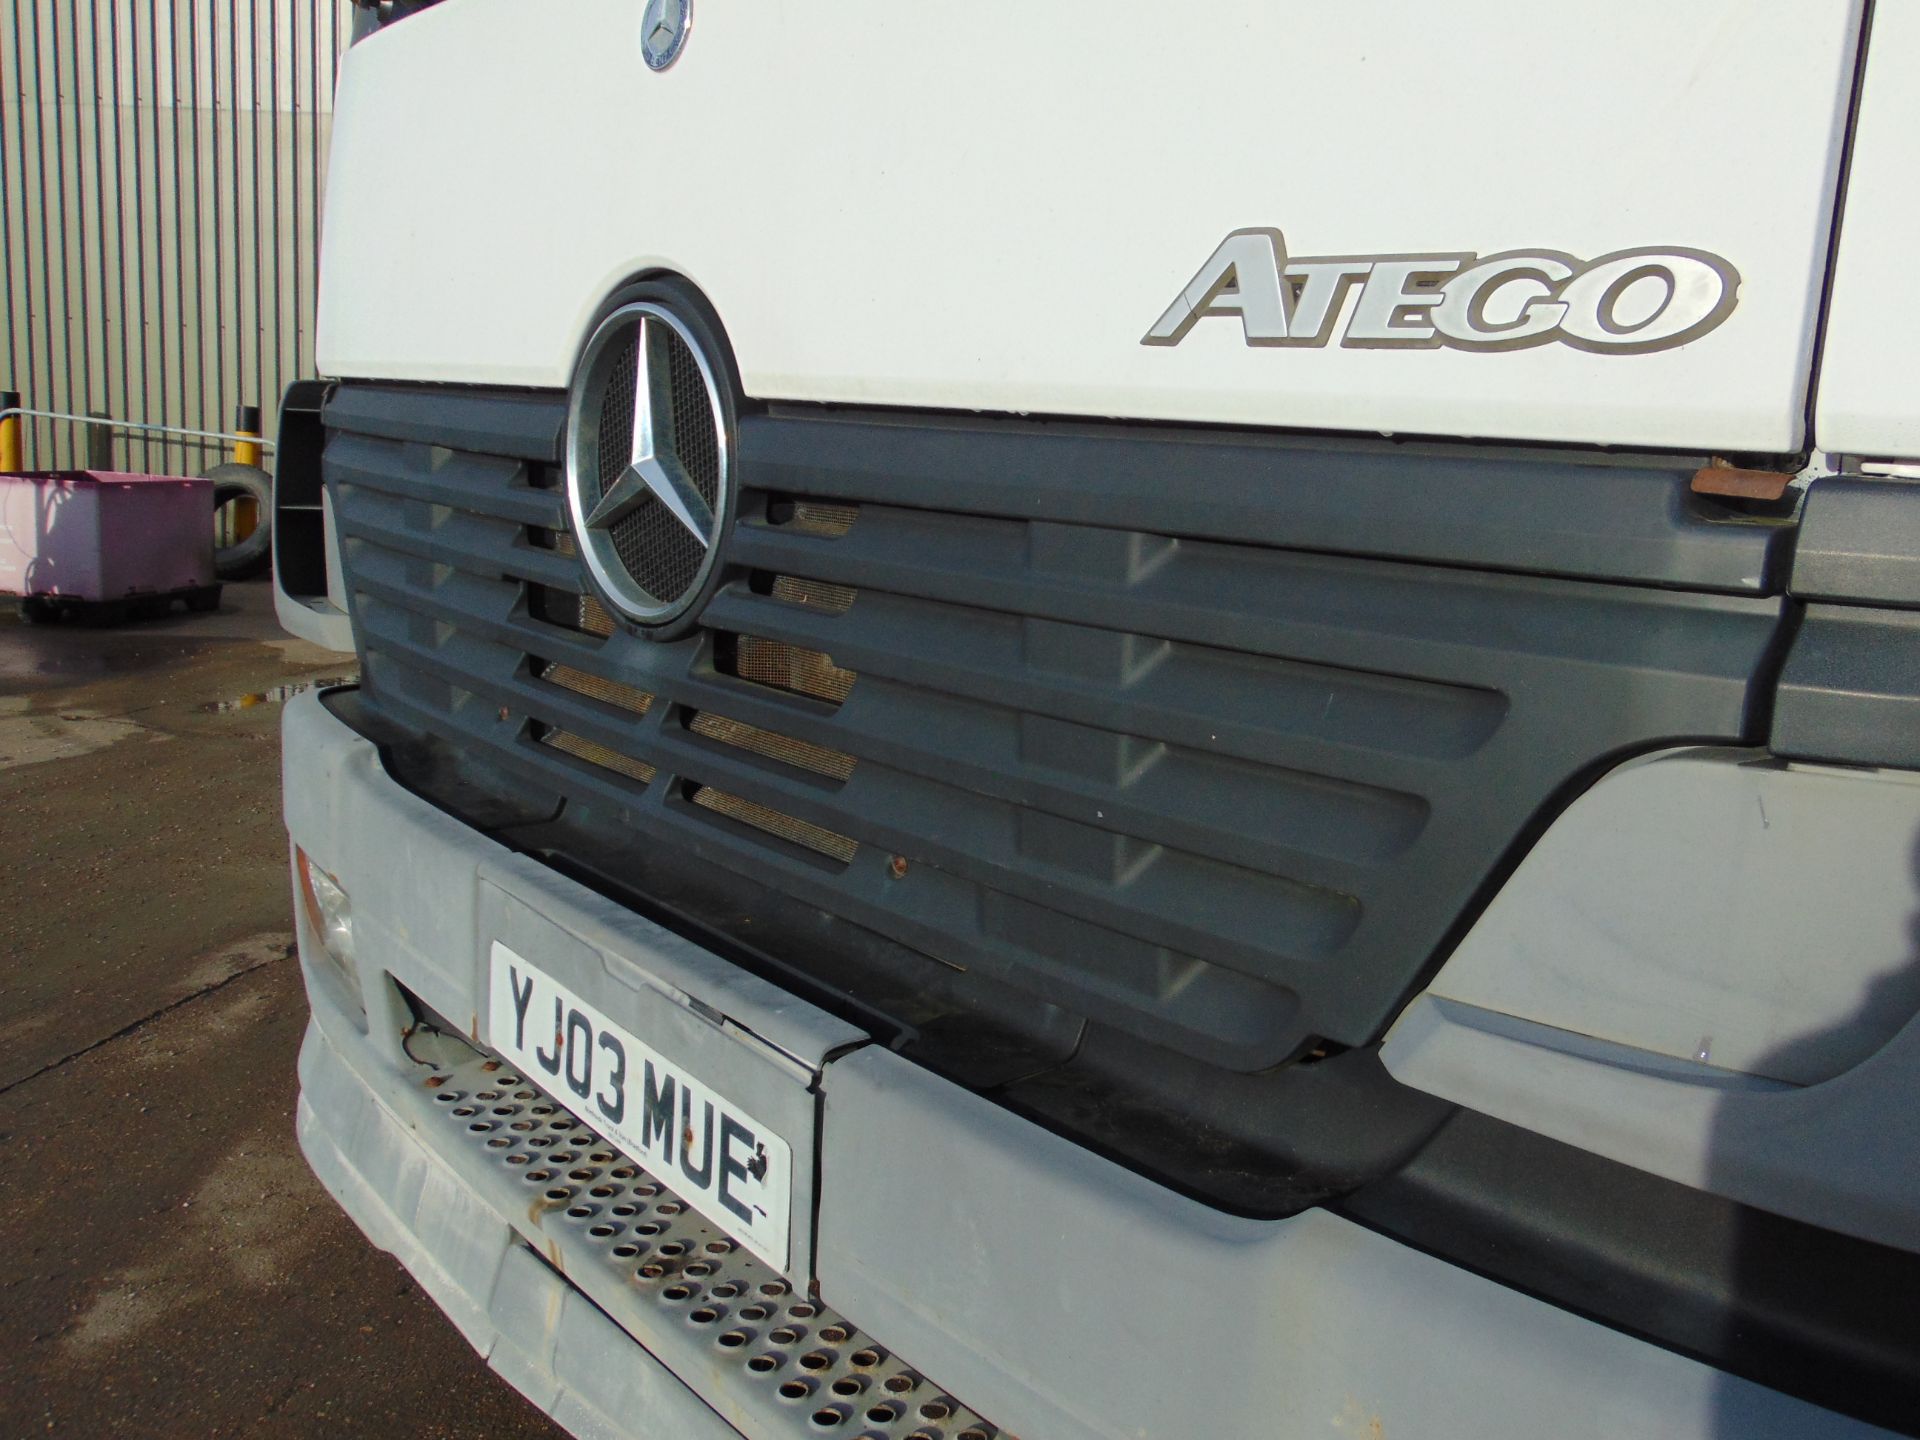 2003 Mercedes Atego 4x2 1823 Manual Flatbed Truck - Image 10 of 20